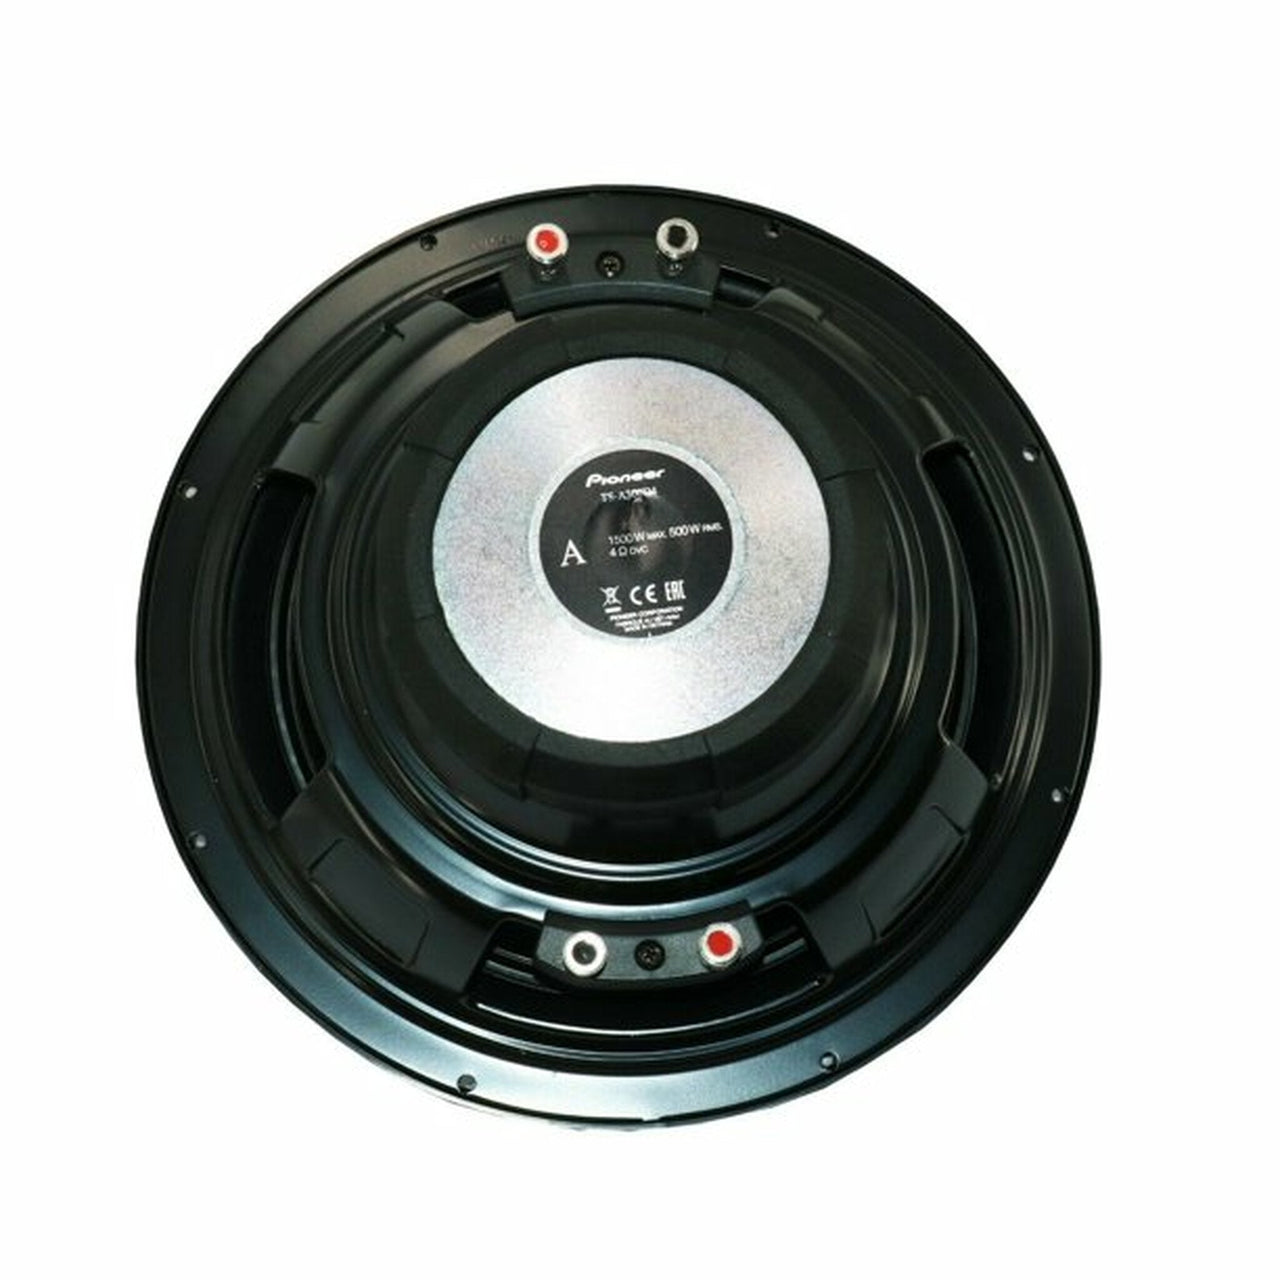 Pioneer TS-A300D4 12” Dual 4 Ohms Voice Coil Subwoofer - 1500 Watts